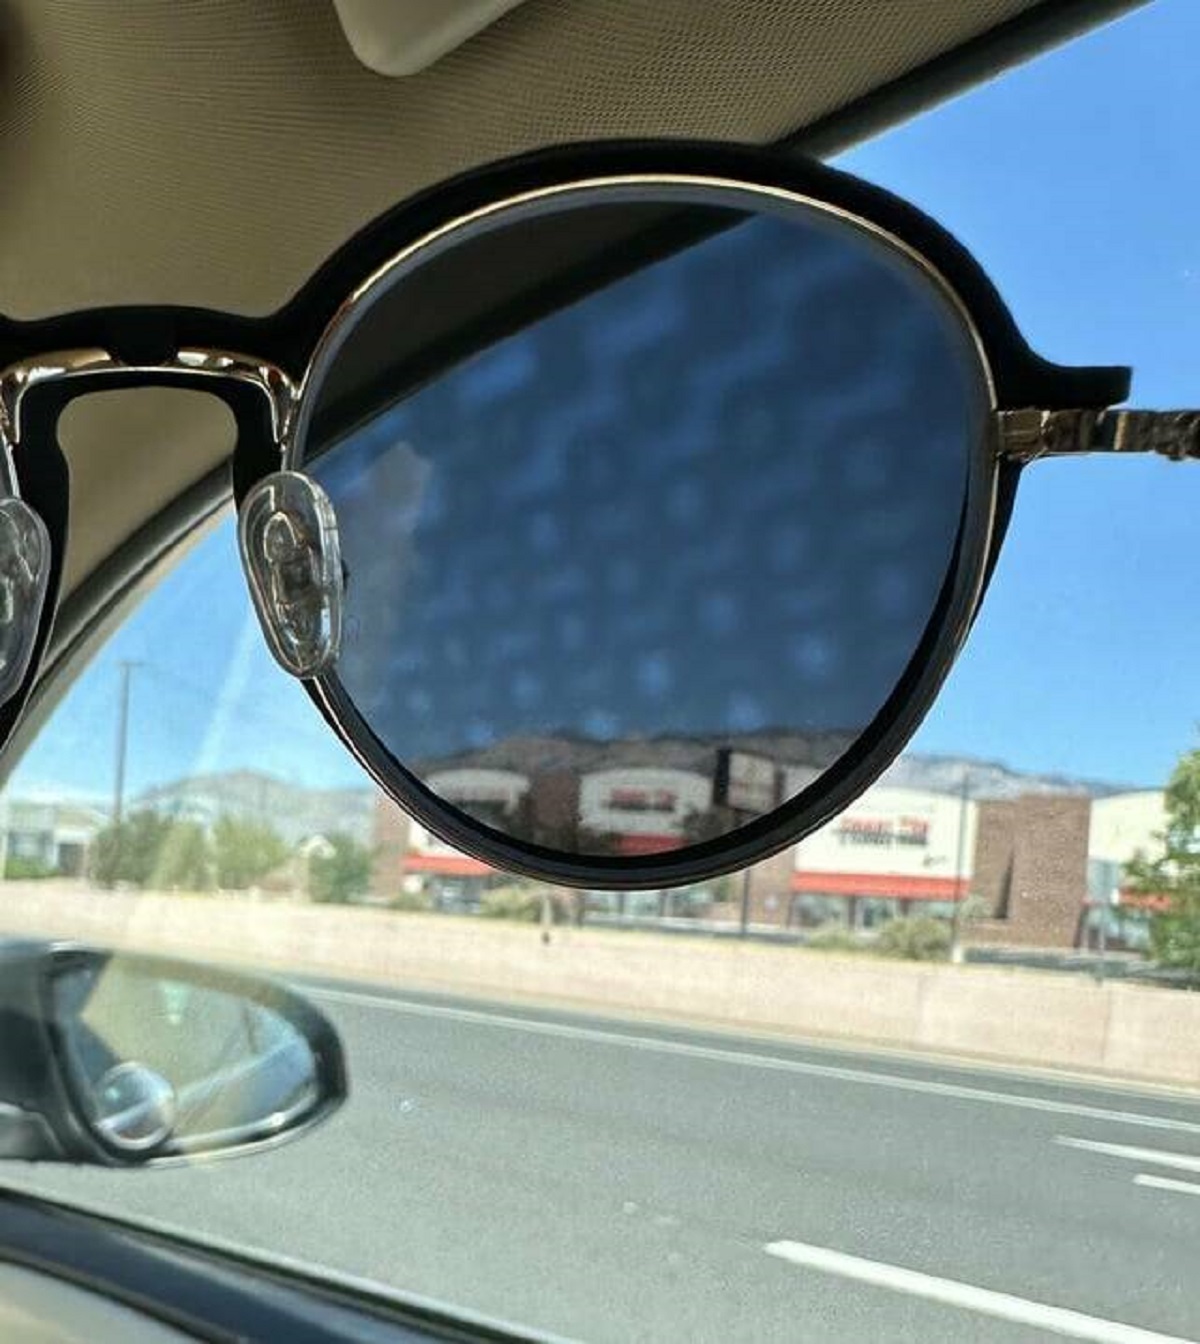 "My sun glasses allow me to see some otherwise invisible pattern on these car windows"